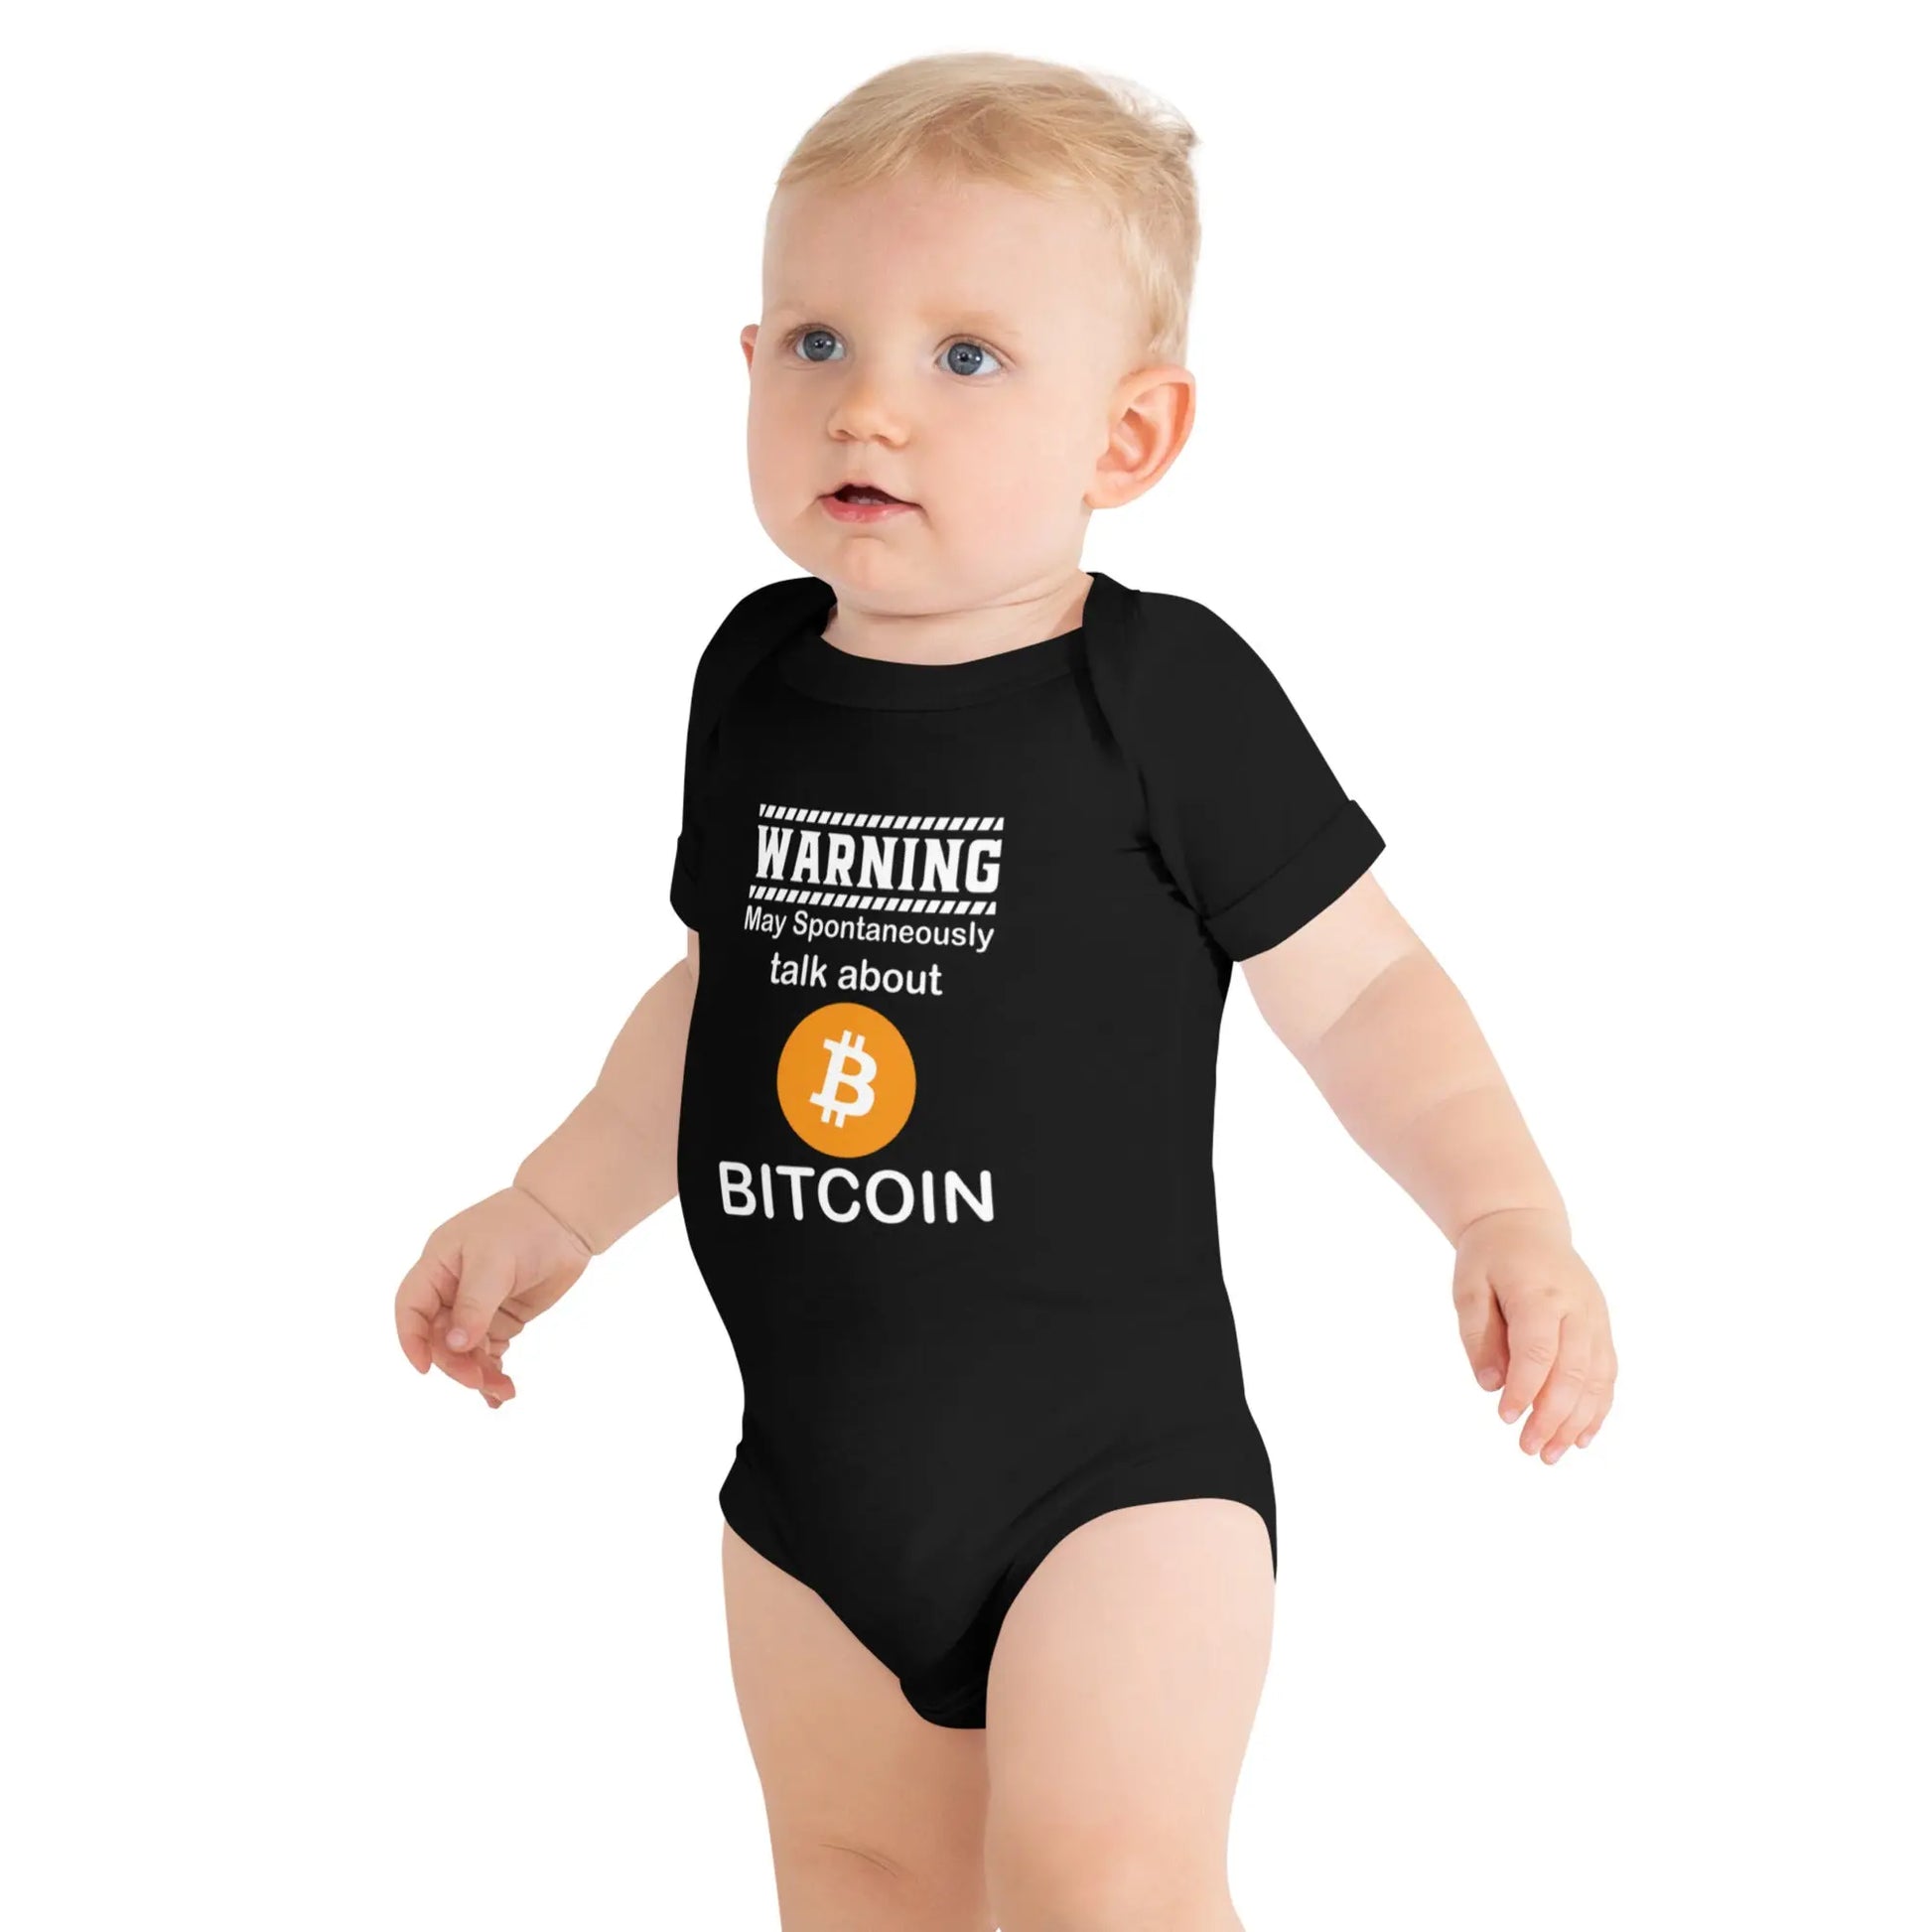 Talk About Bitcoin - Baby Bitcoin Body Suit - One Piece with Short Sleeve Black